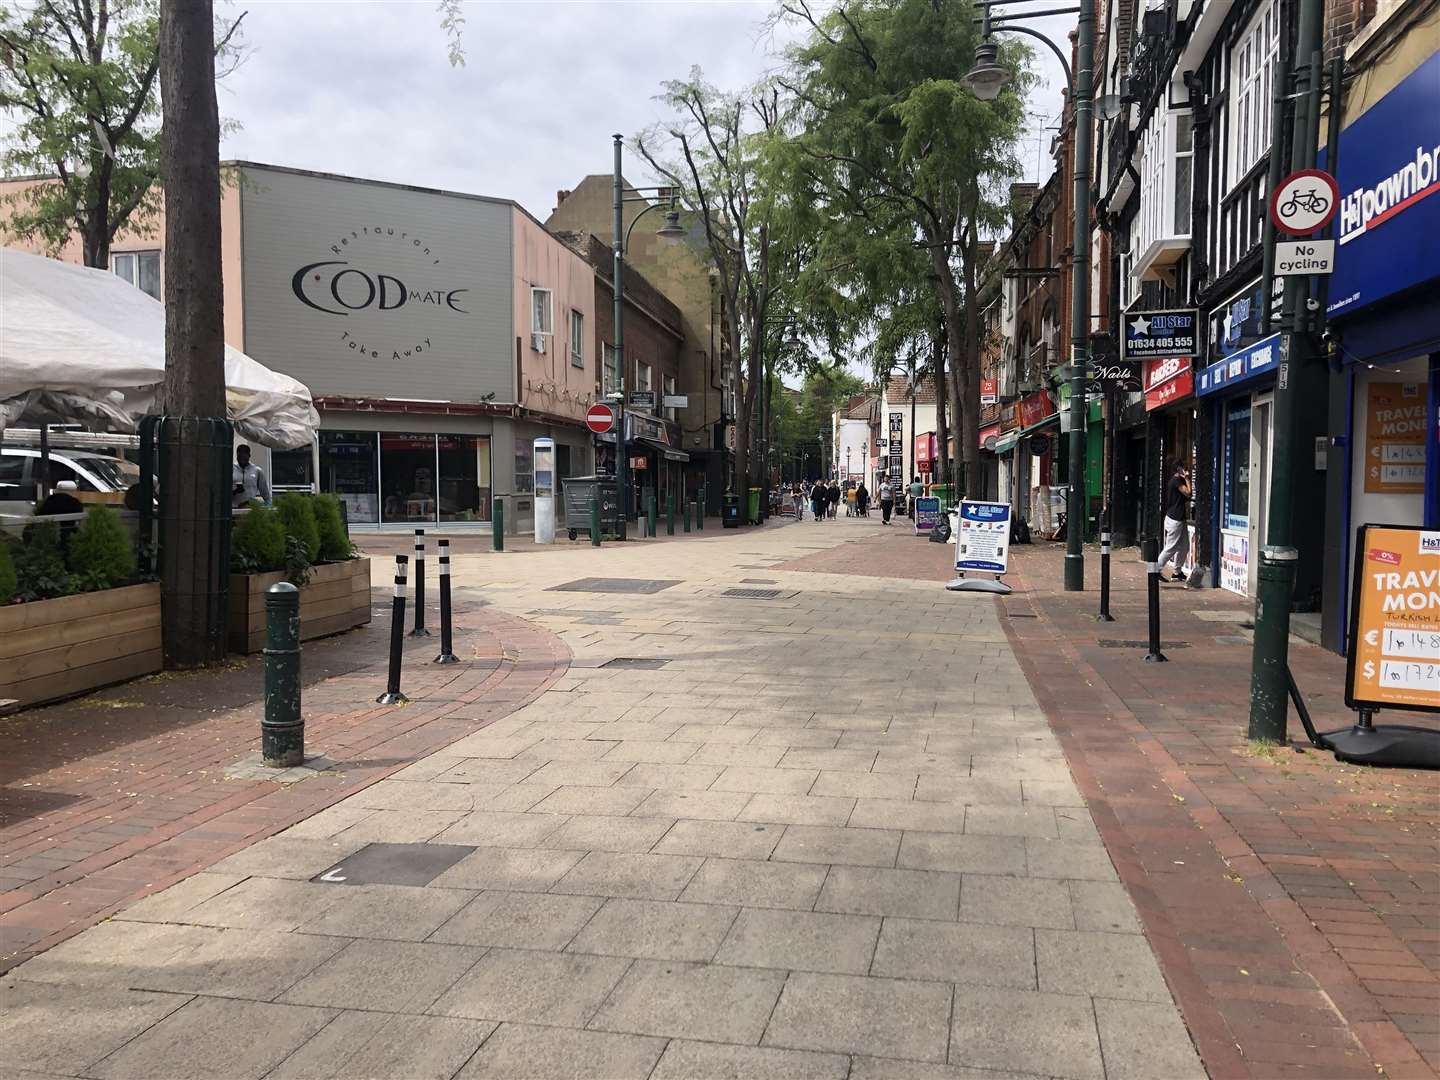 Police carried out the search in Chatham High Street